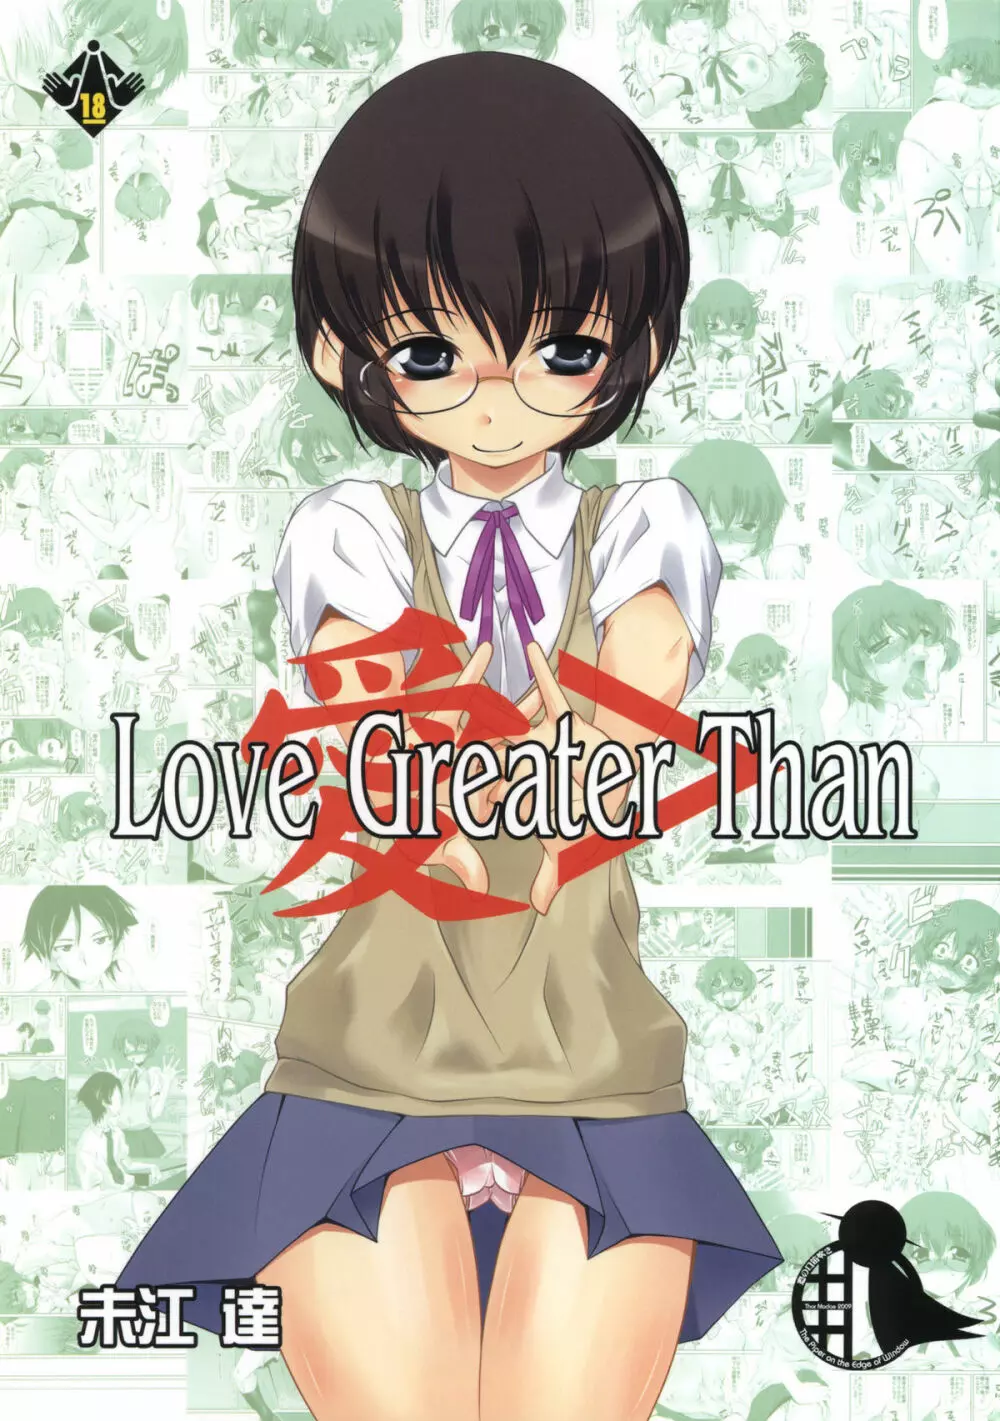 Love Greater Than 1ページ